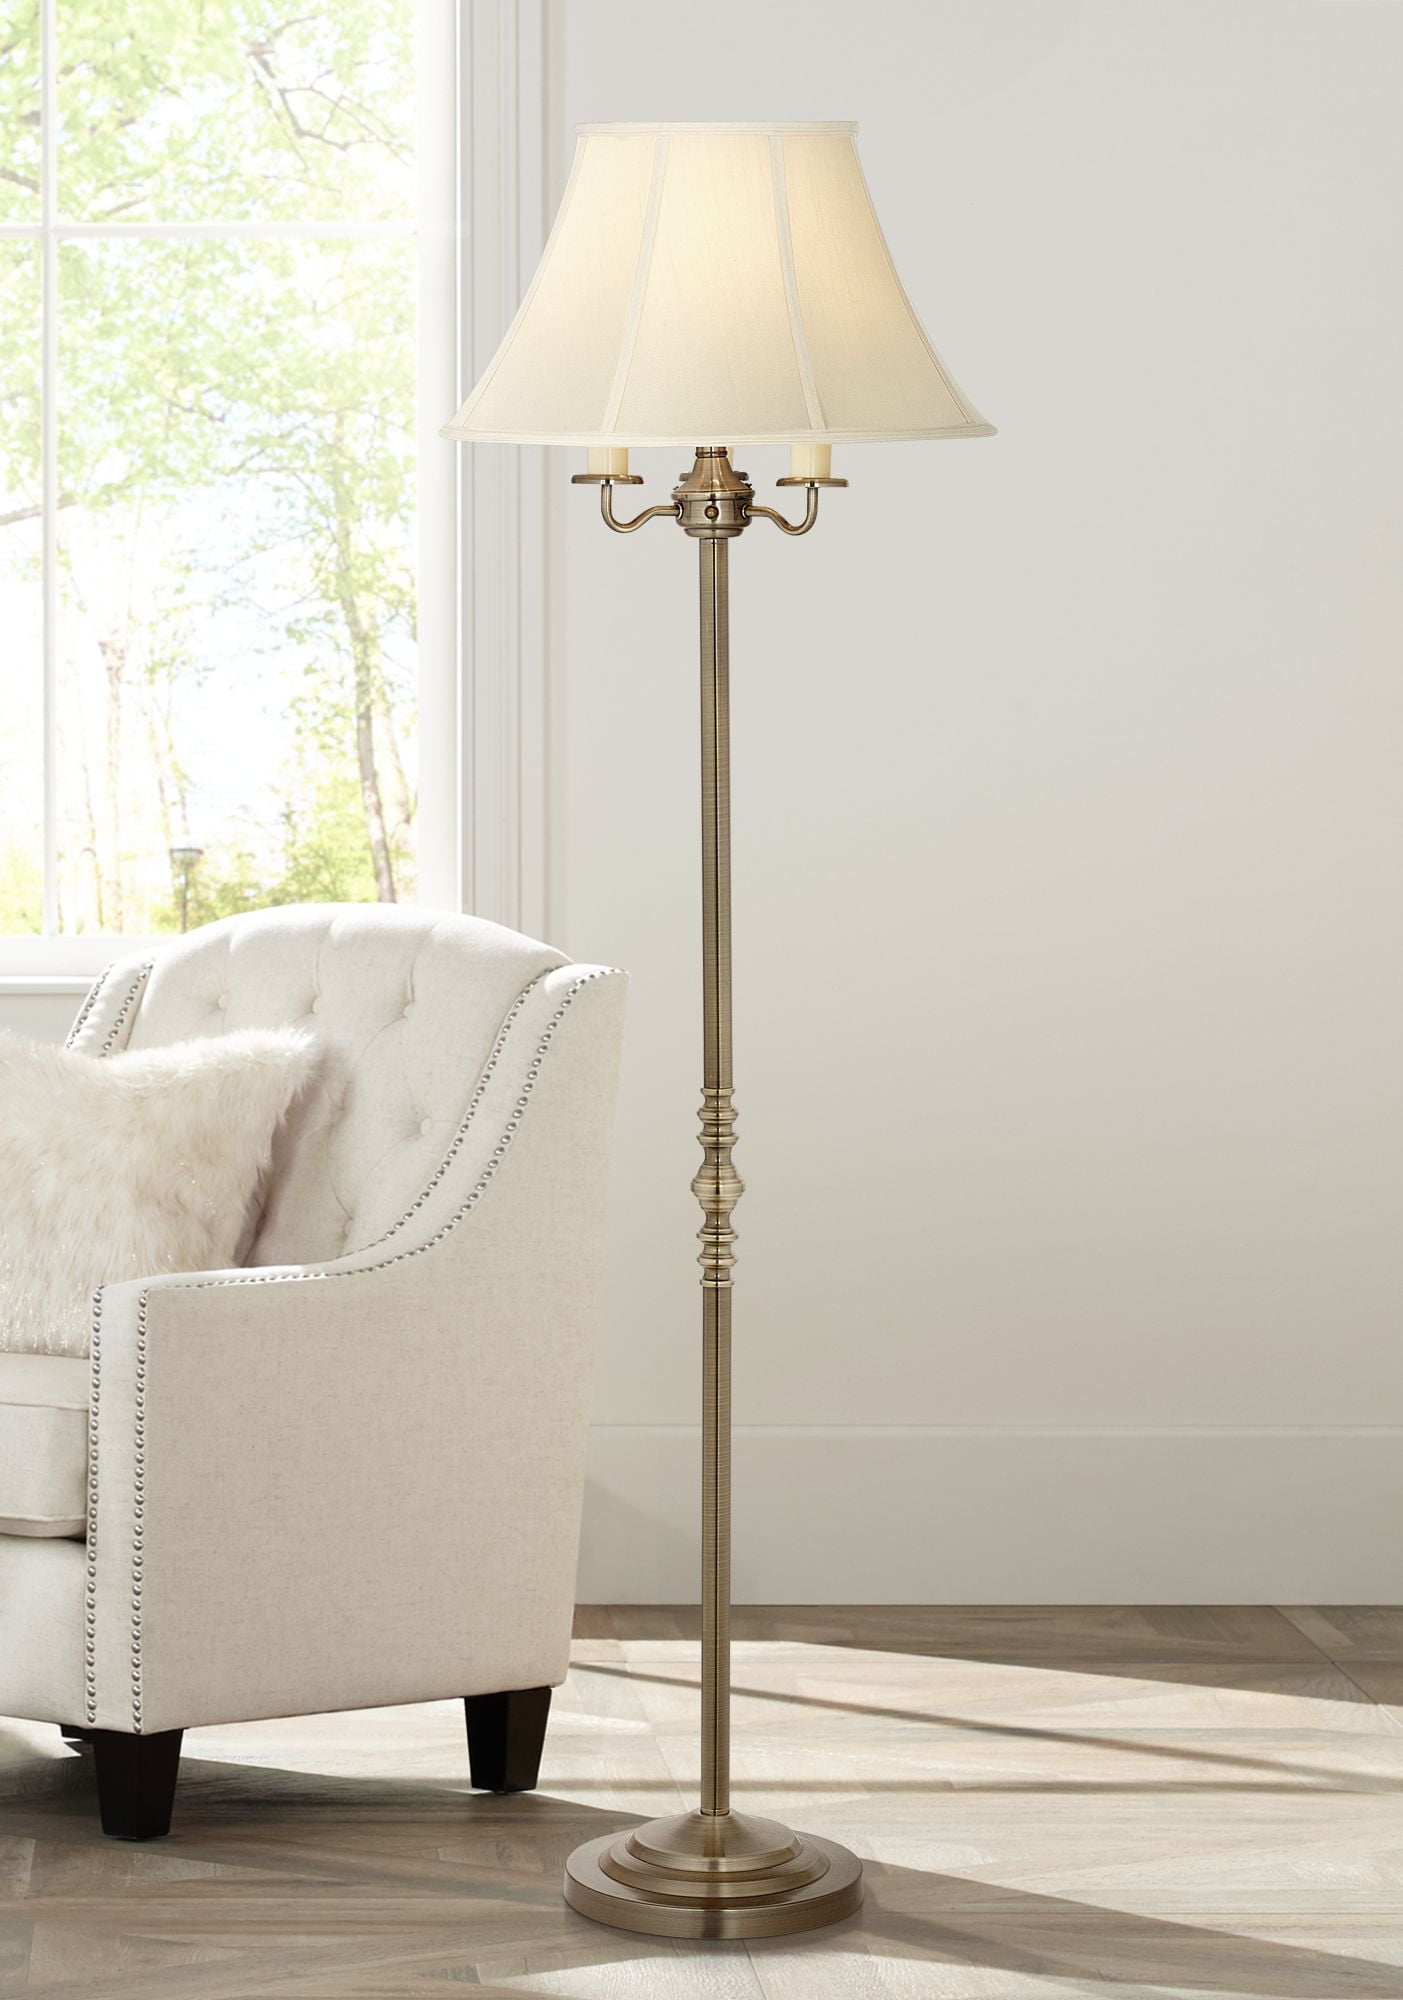 Regency Hill Traditional Floor Lamp Antique Brass Shabby Chic Off White